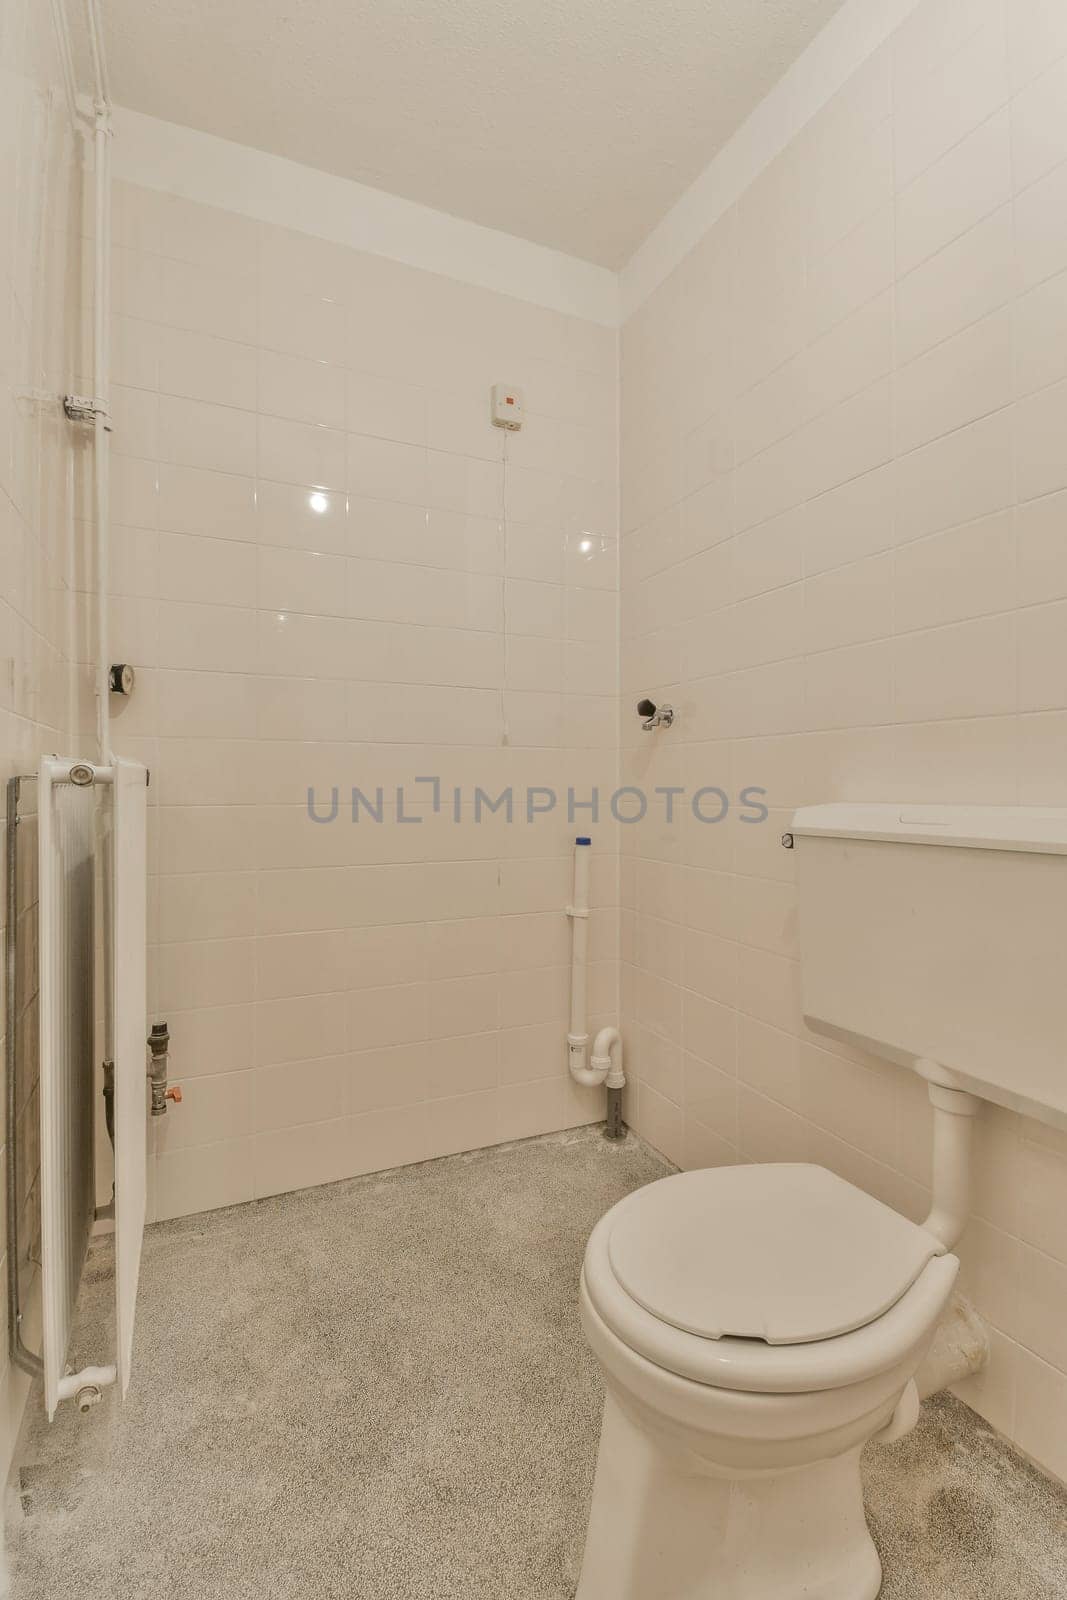 a bathroom with white tiles on the walls, and a toilet in the middle part of the room is empty